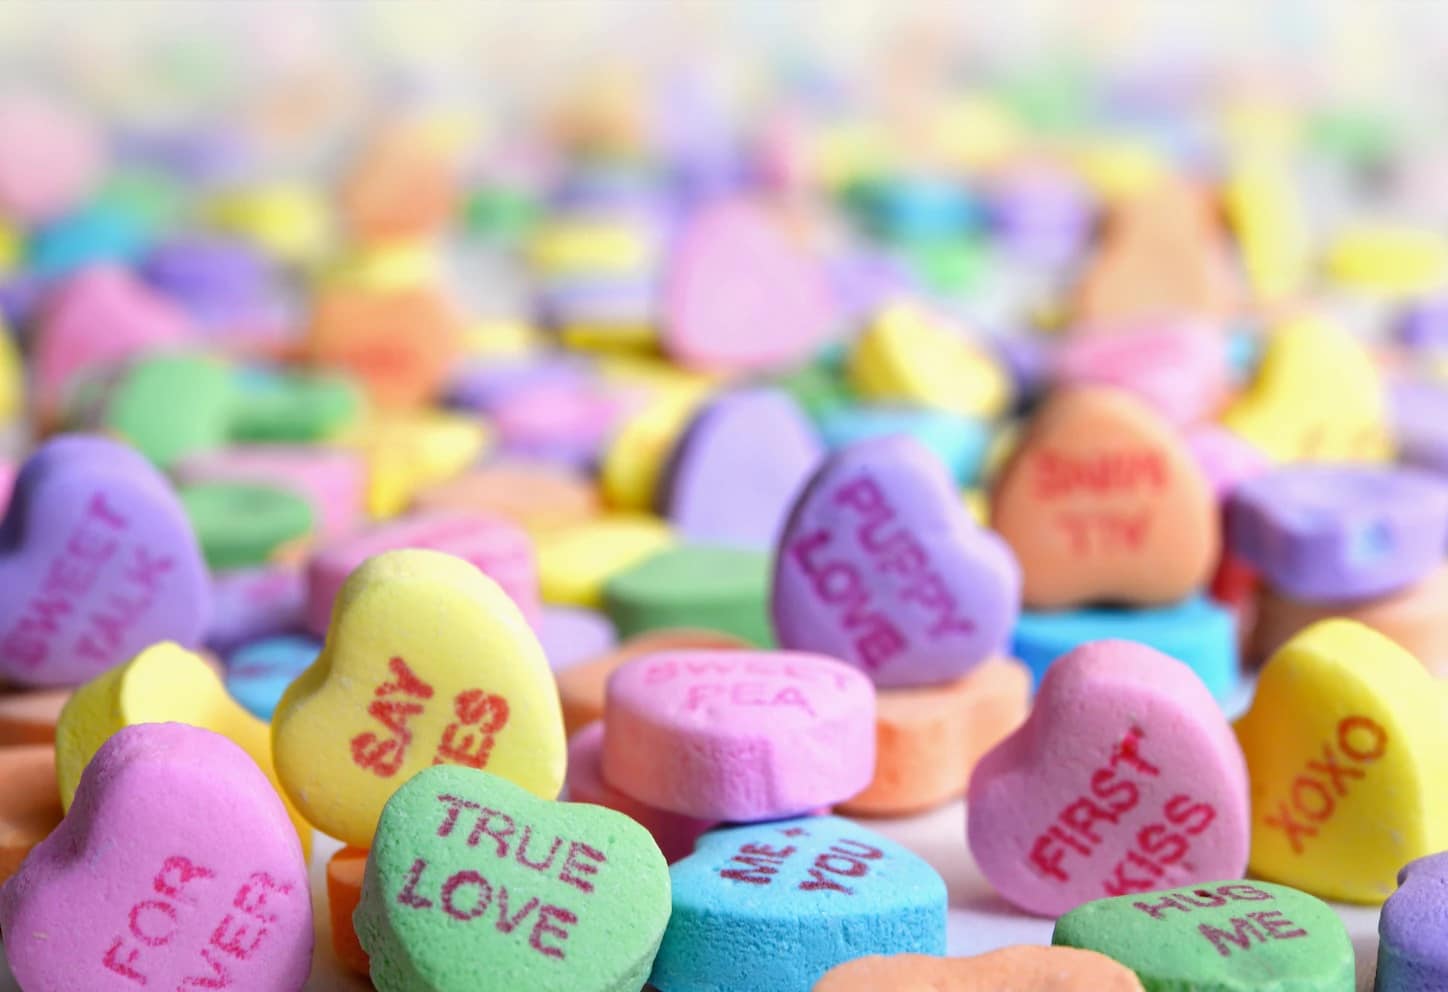 Candy Hearts, and Memories